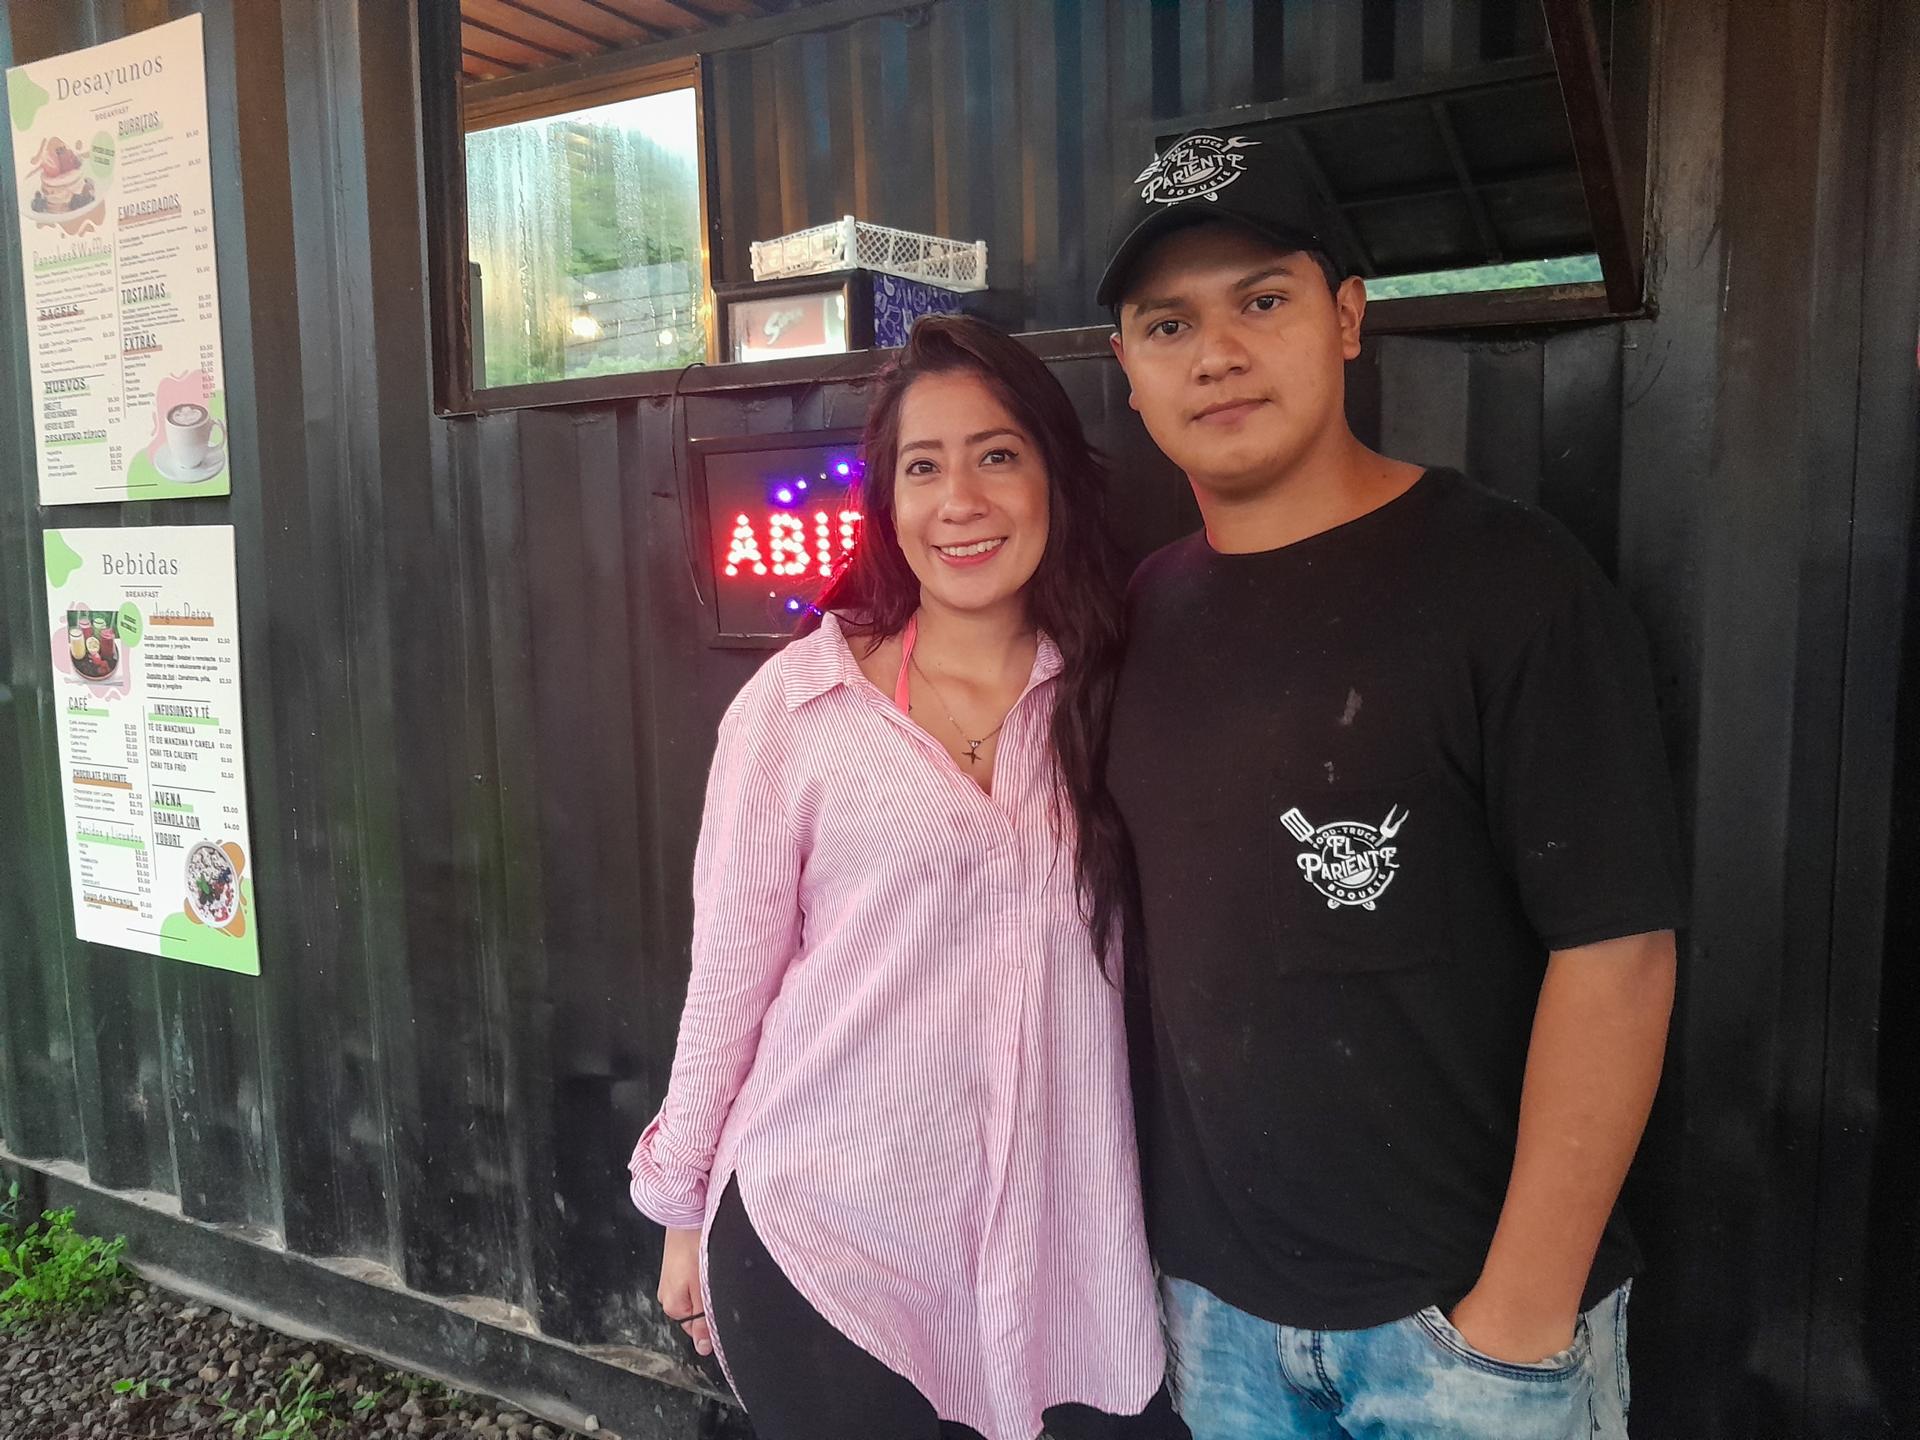 Man and woman stand beside each other posing for photo. The woman wears a pink shirt and the man is wearing a black baseball cap, black shirt and light-colored jeans